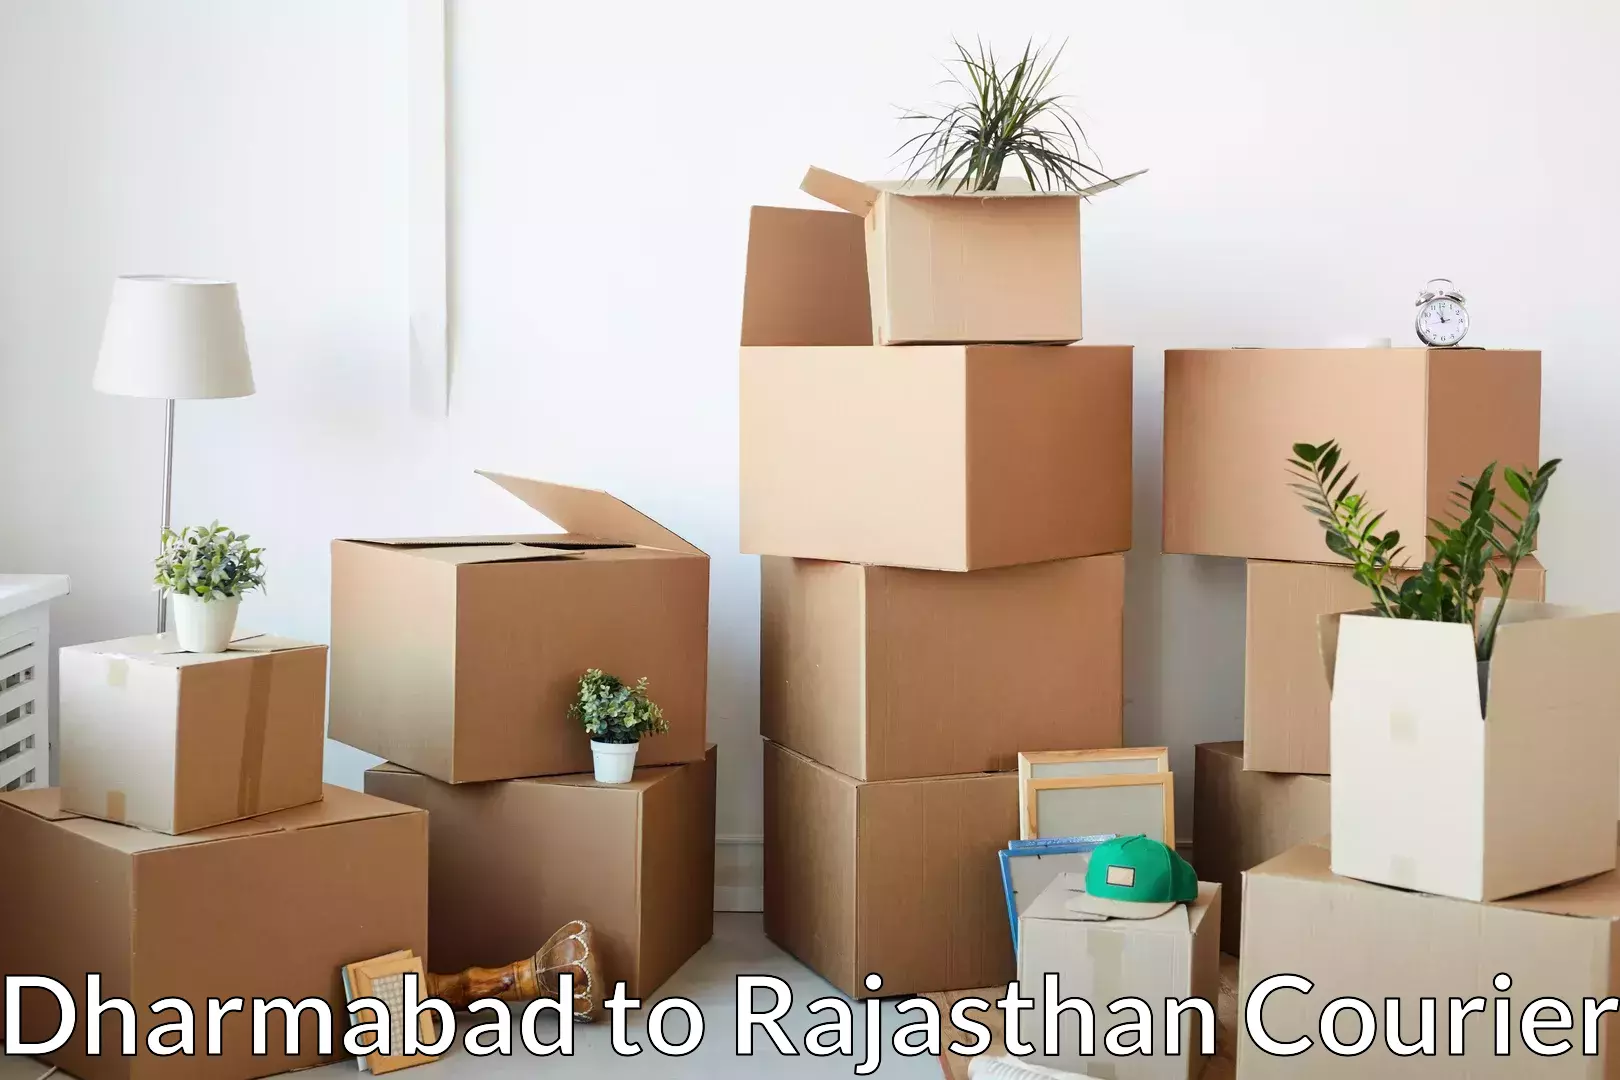 Furniture transport specialists Dharmabad to Rajasthan